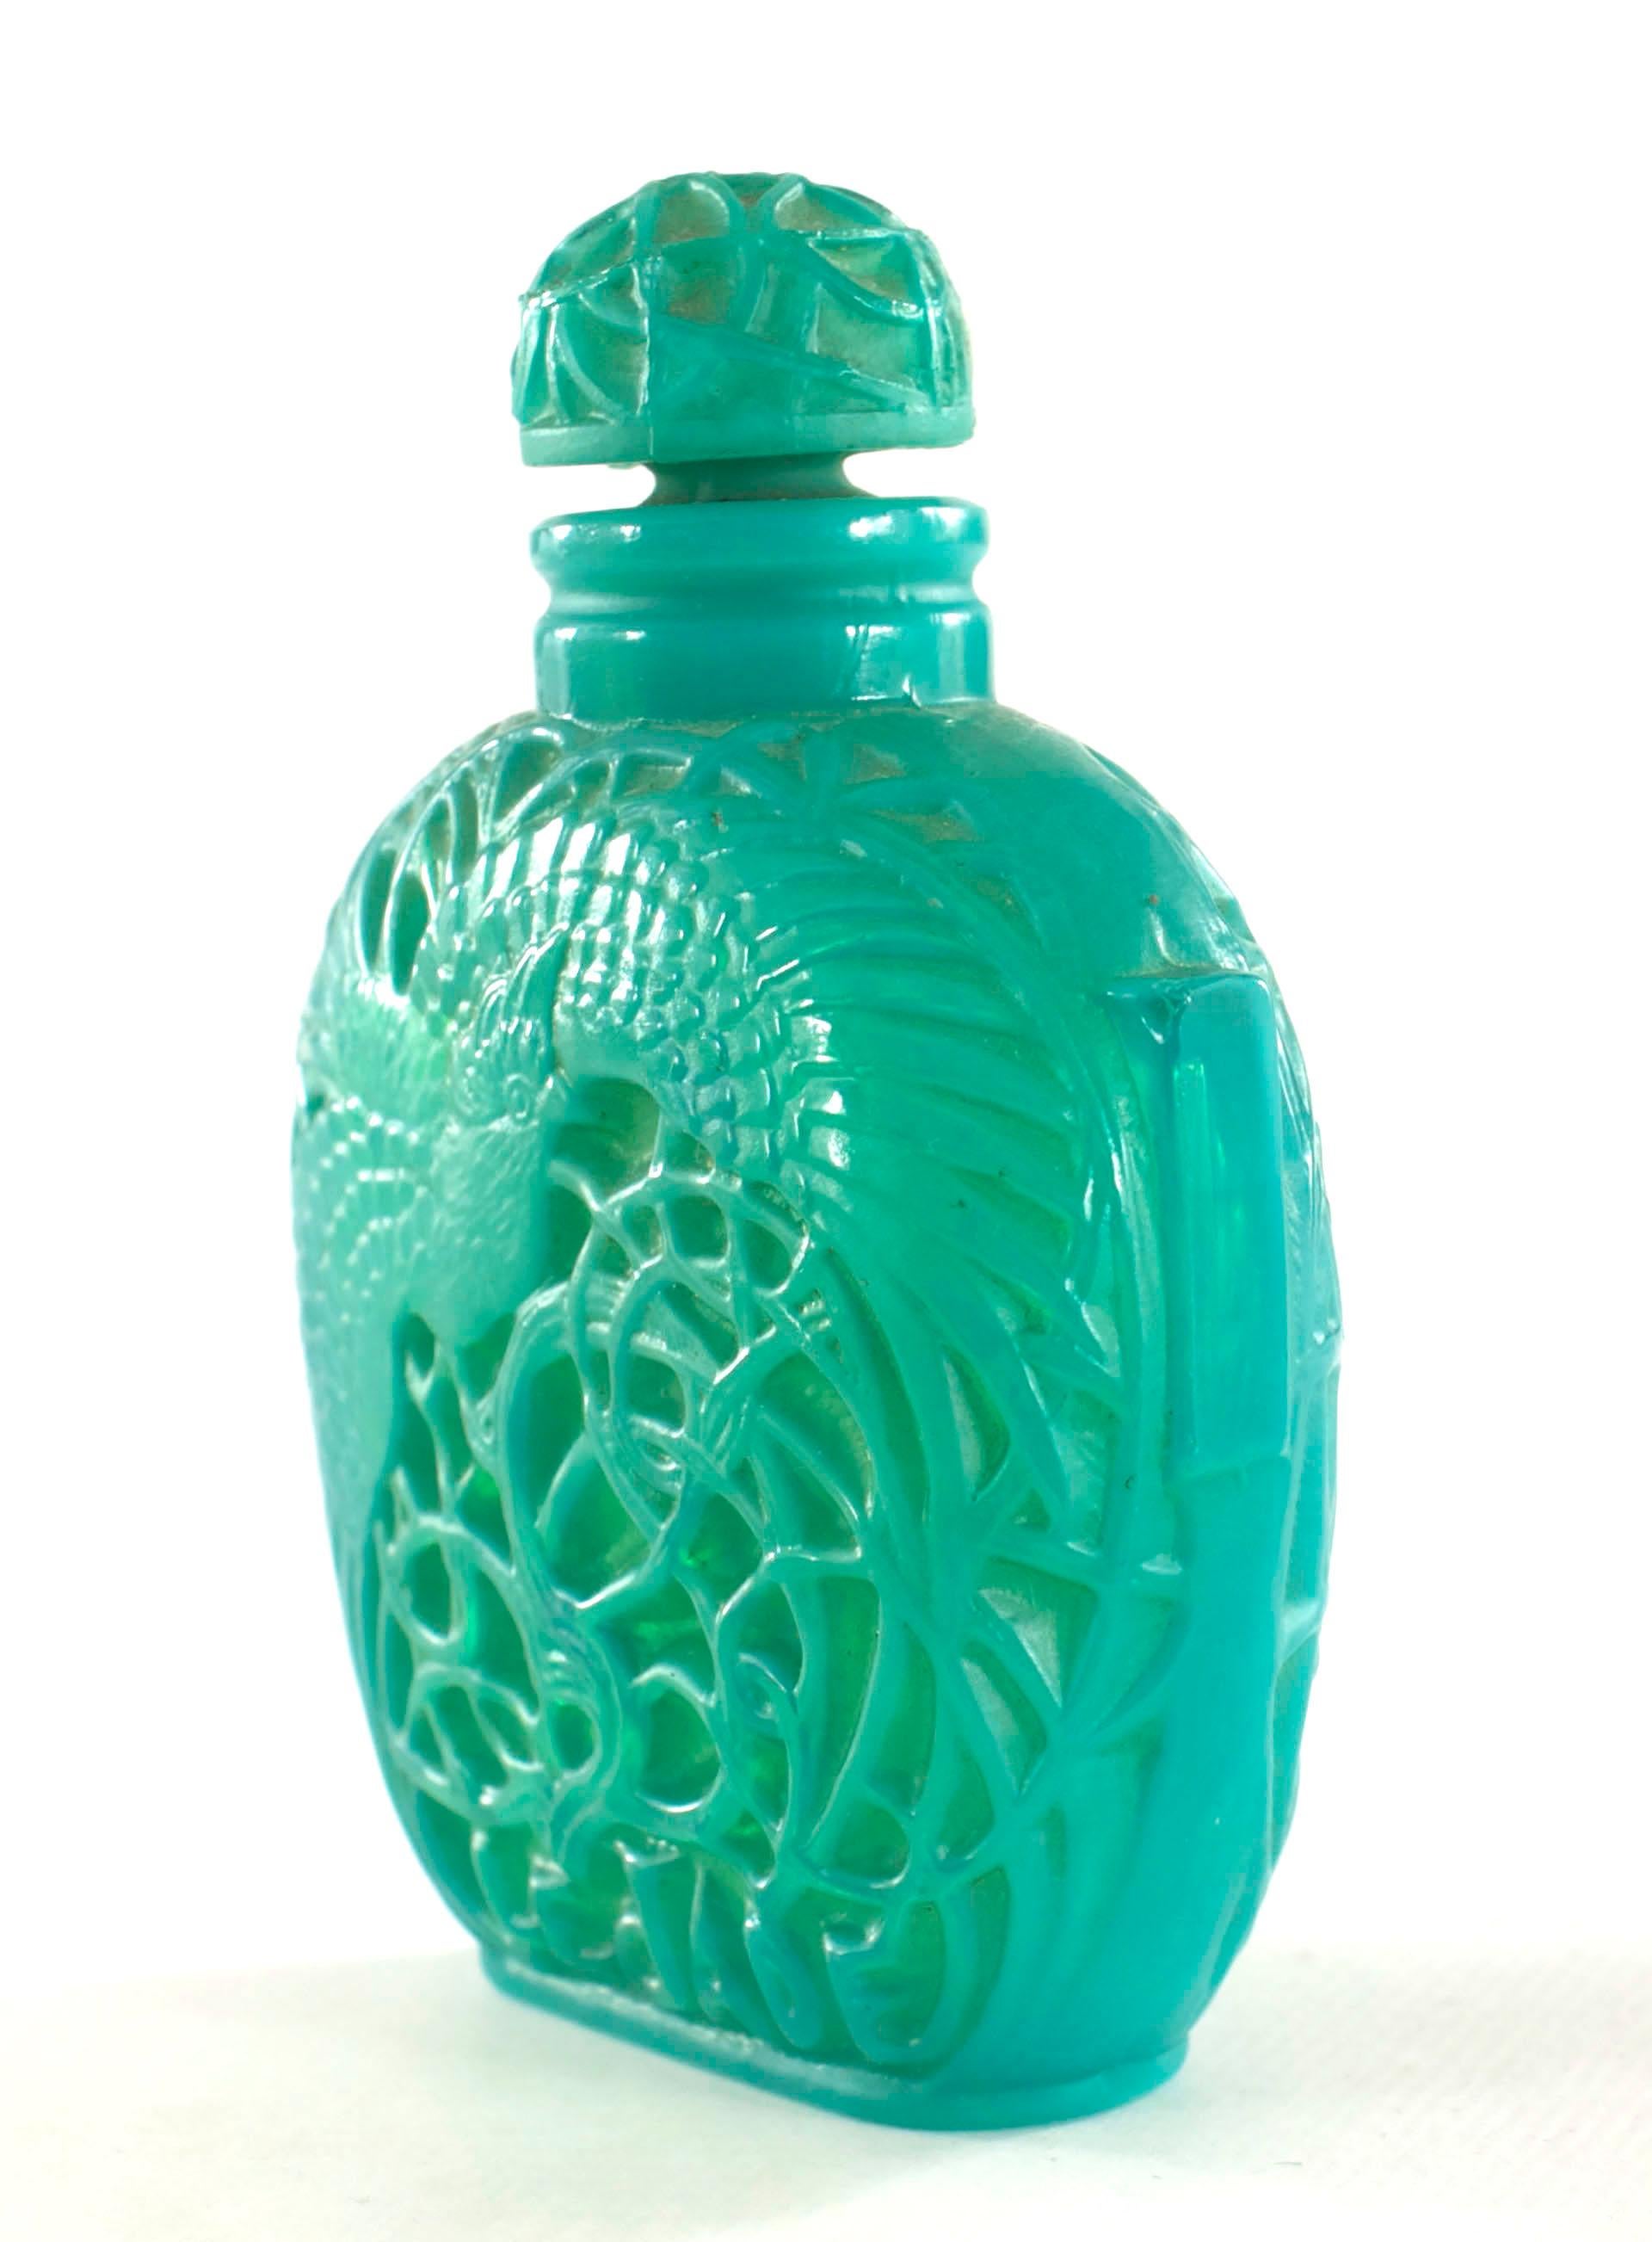 French Art Deco green glass perfume bottle (LE JADE by ROGER ET GALLET) with molded overlapping rows of vertical leaf tips along the body and a matching stopper (signed LALIQUE) (as is- chip to top).